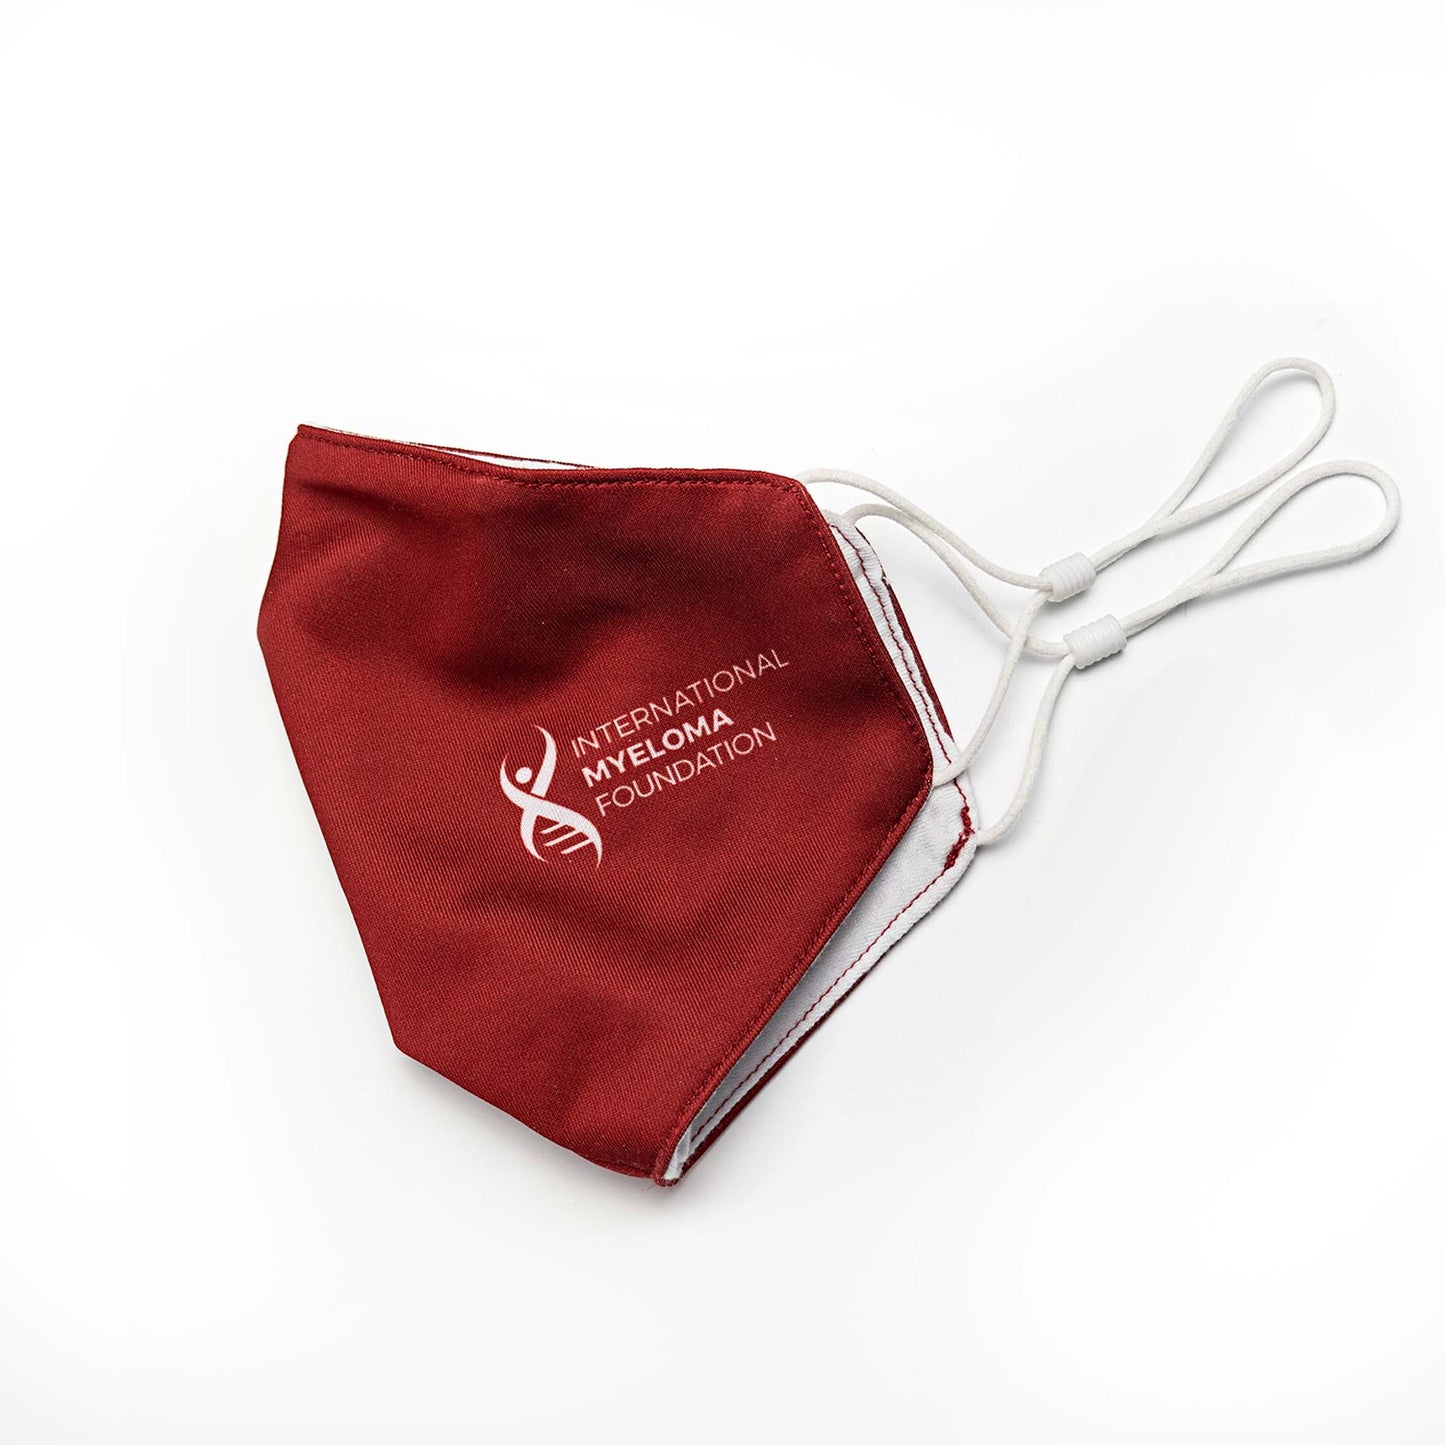 International Myeloma Foundation branded face masks in red